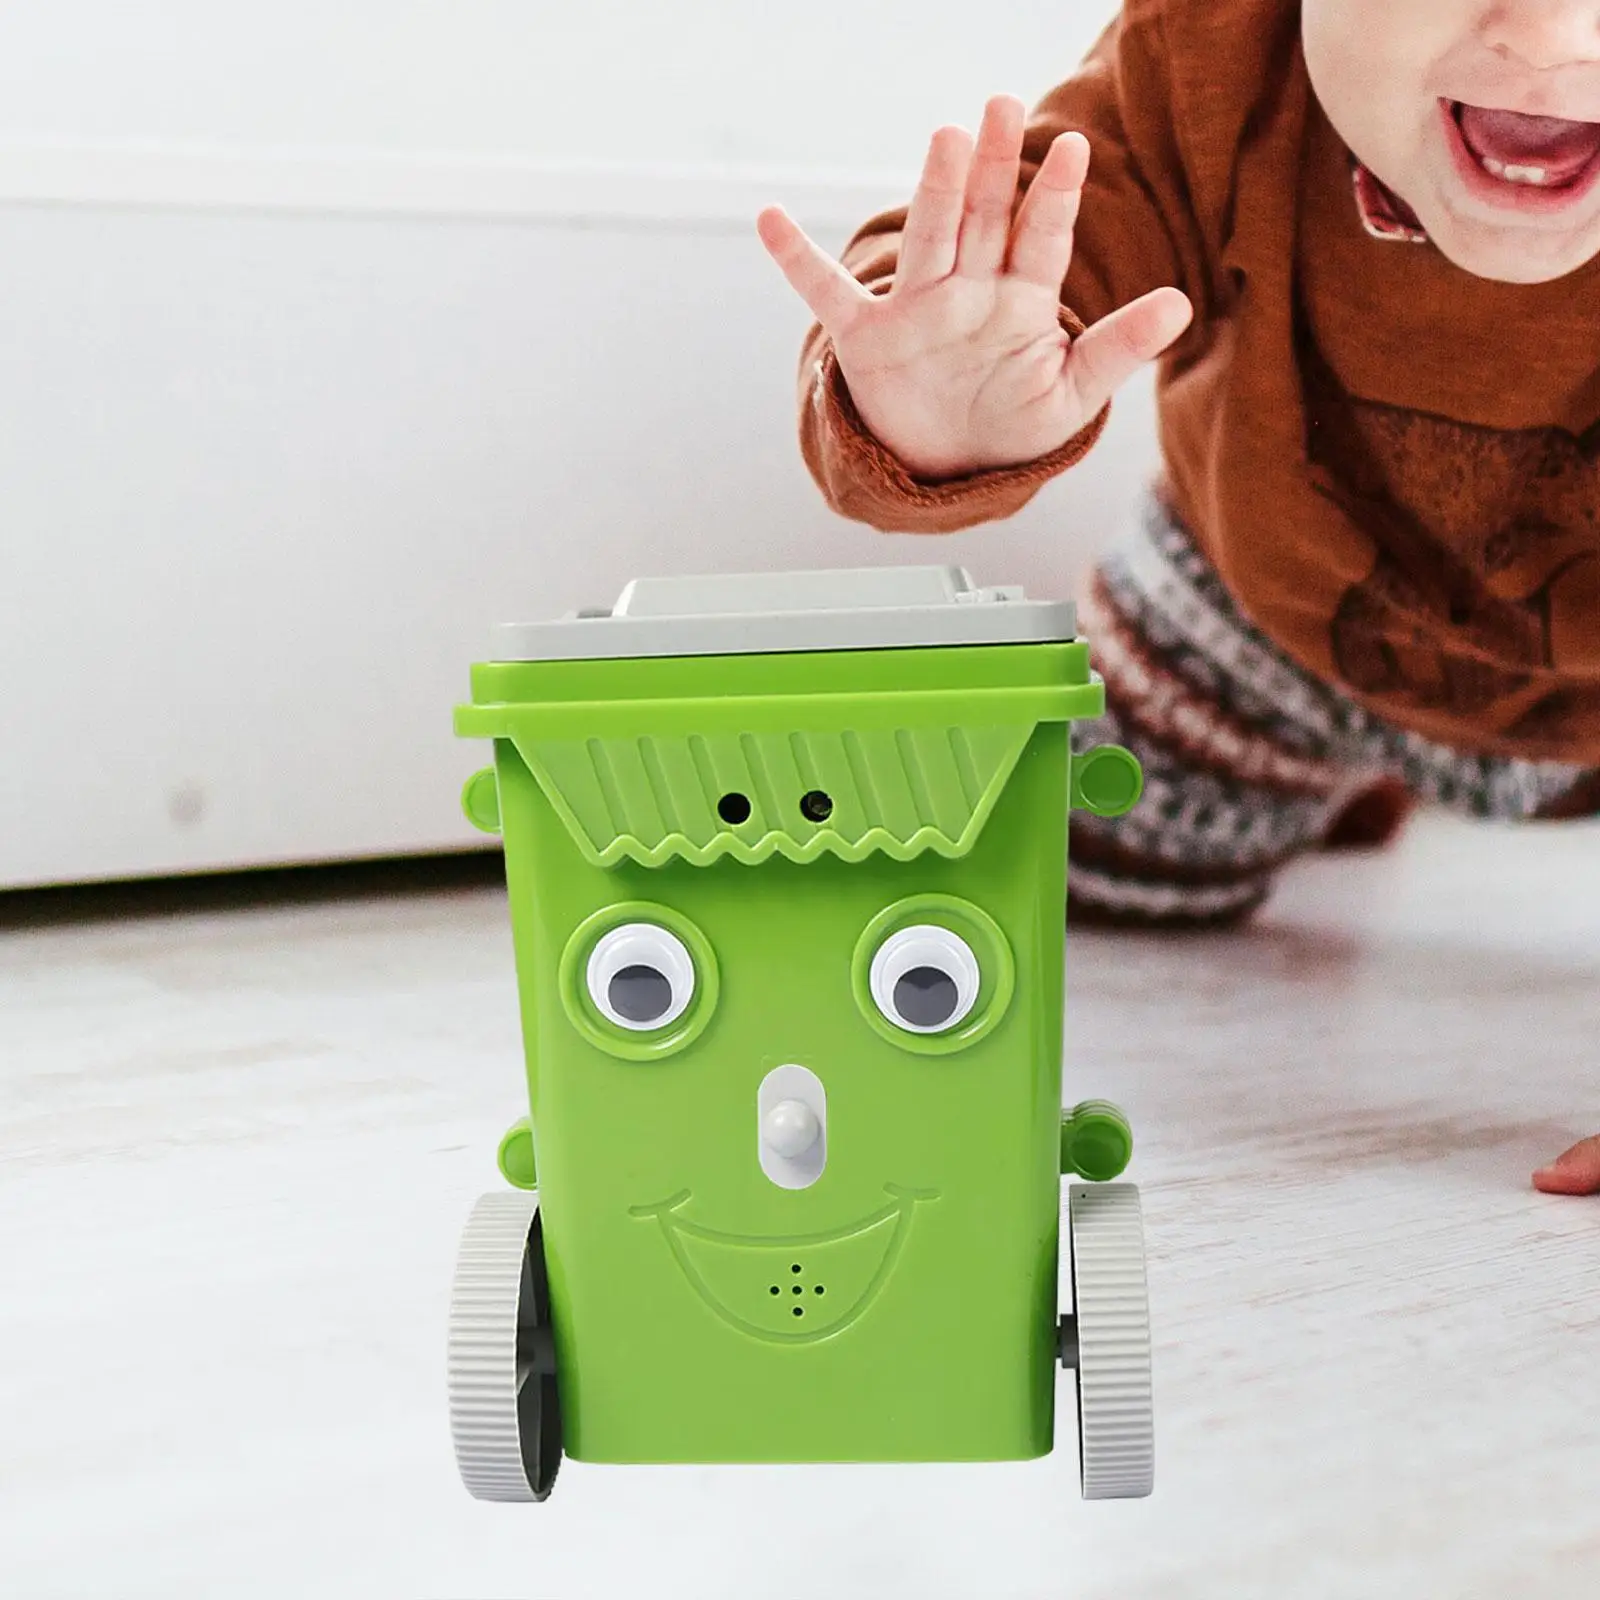 Small Robot Vacuum Cleaner Toy Realistic Mini Curbside Vehicle Garbage Bin Model for Birthday Party Favors Holiday Gift Present